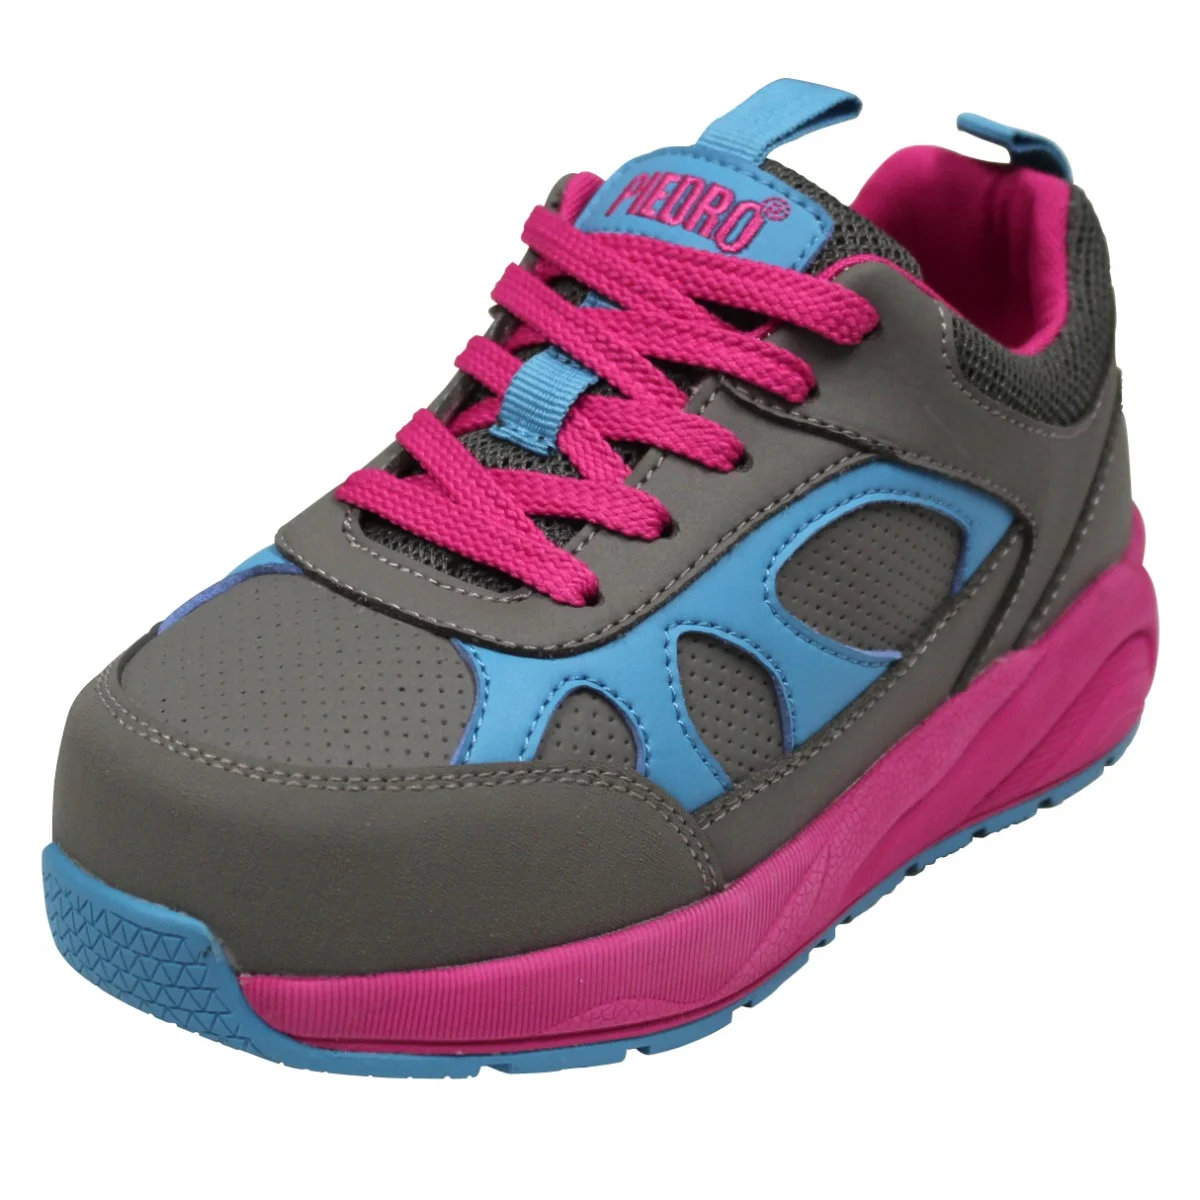 Orthopedic Shoes For Kids